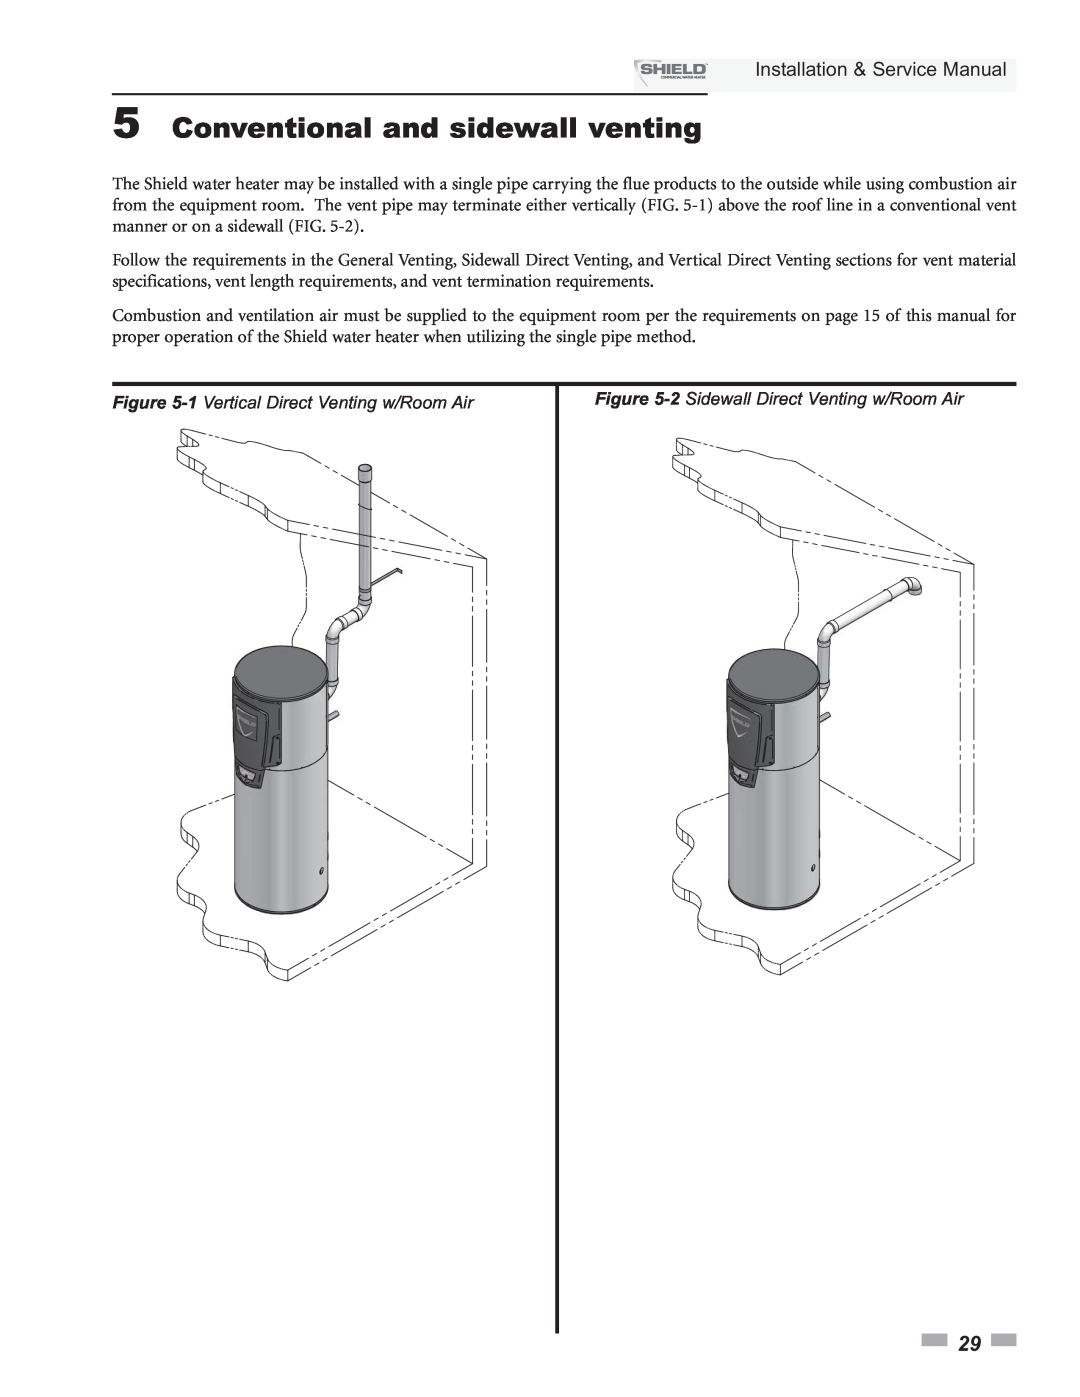 Lochinvar SNA400-125, SNA500-125, SNR200-100, SNA285-125 5Conventional and sidewall venting, Installation & Service Manual 